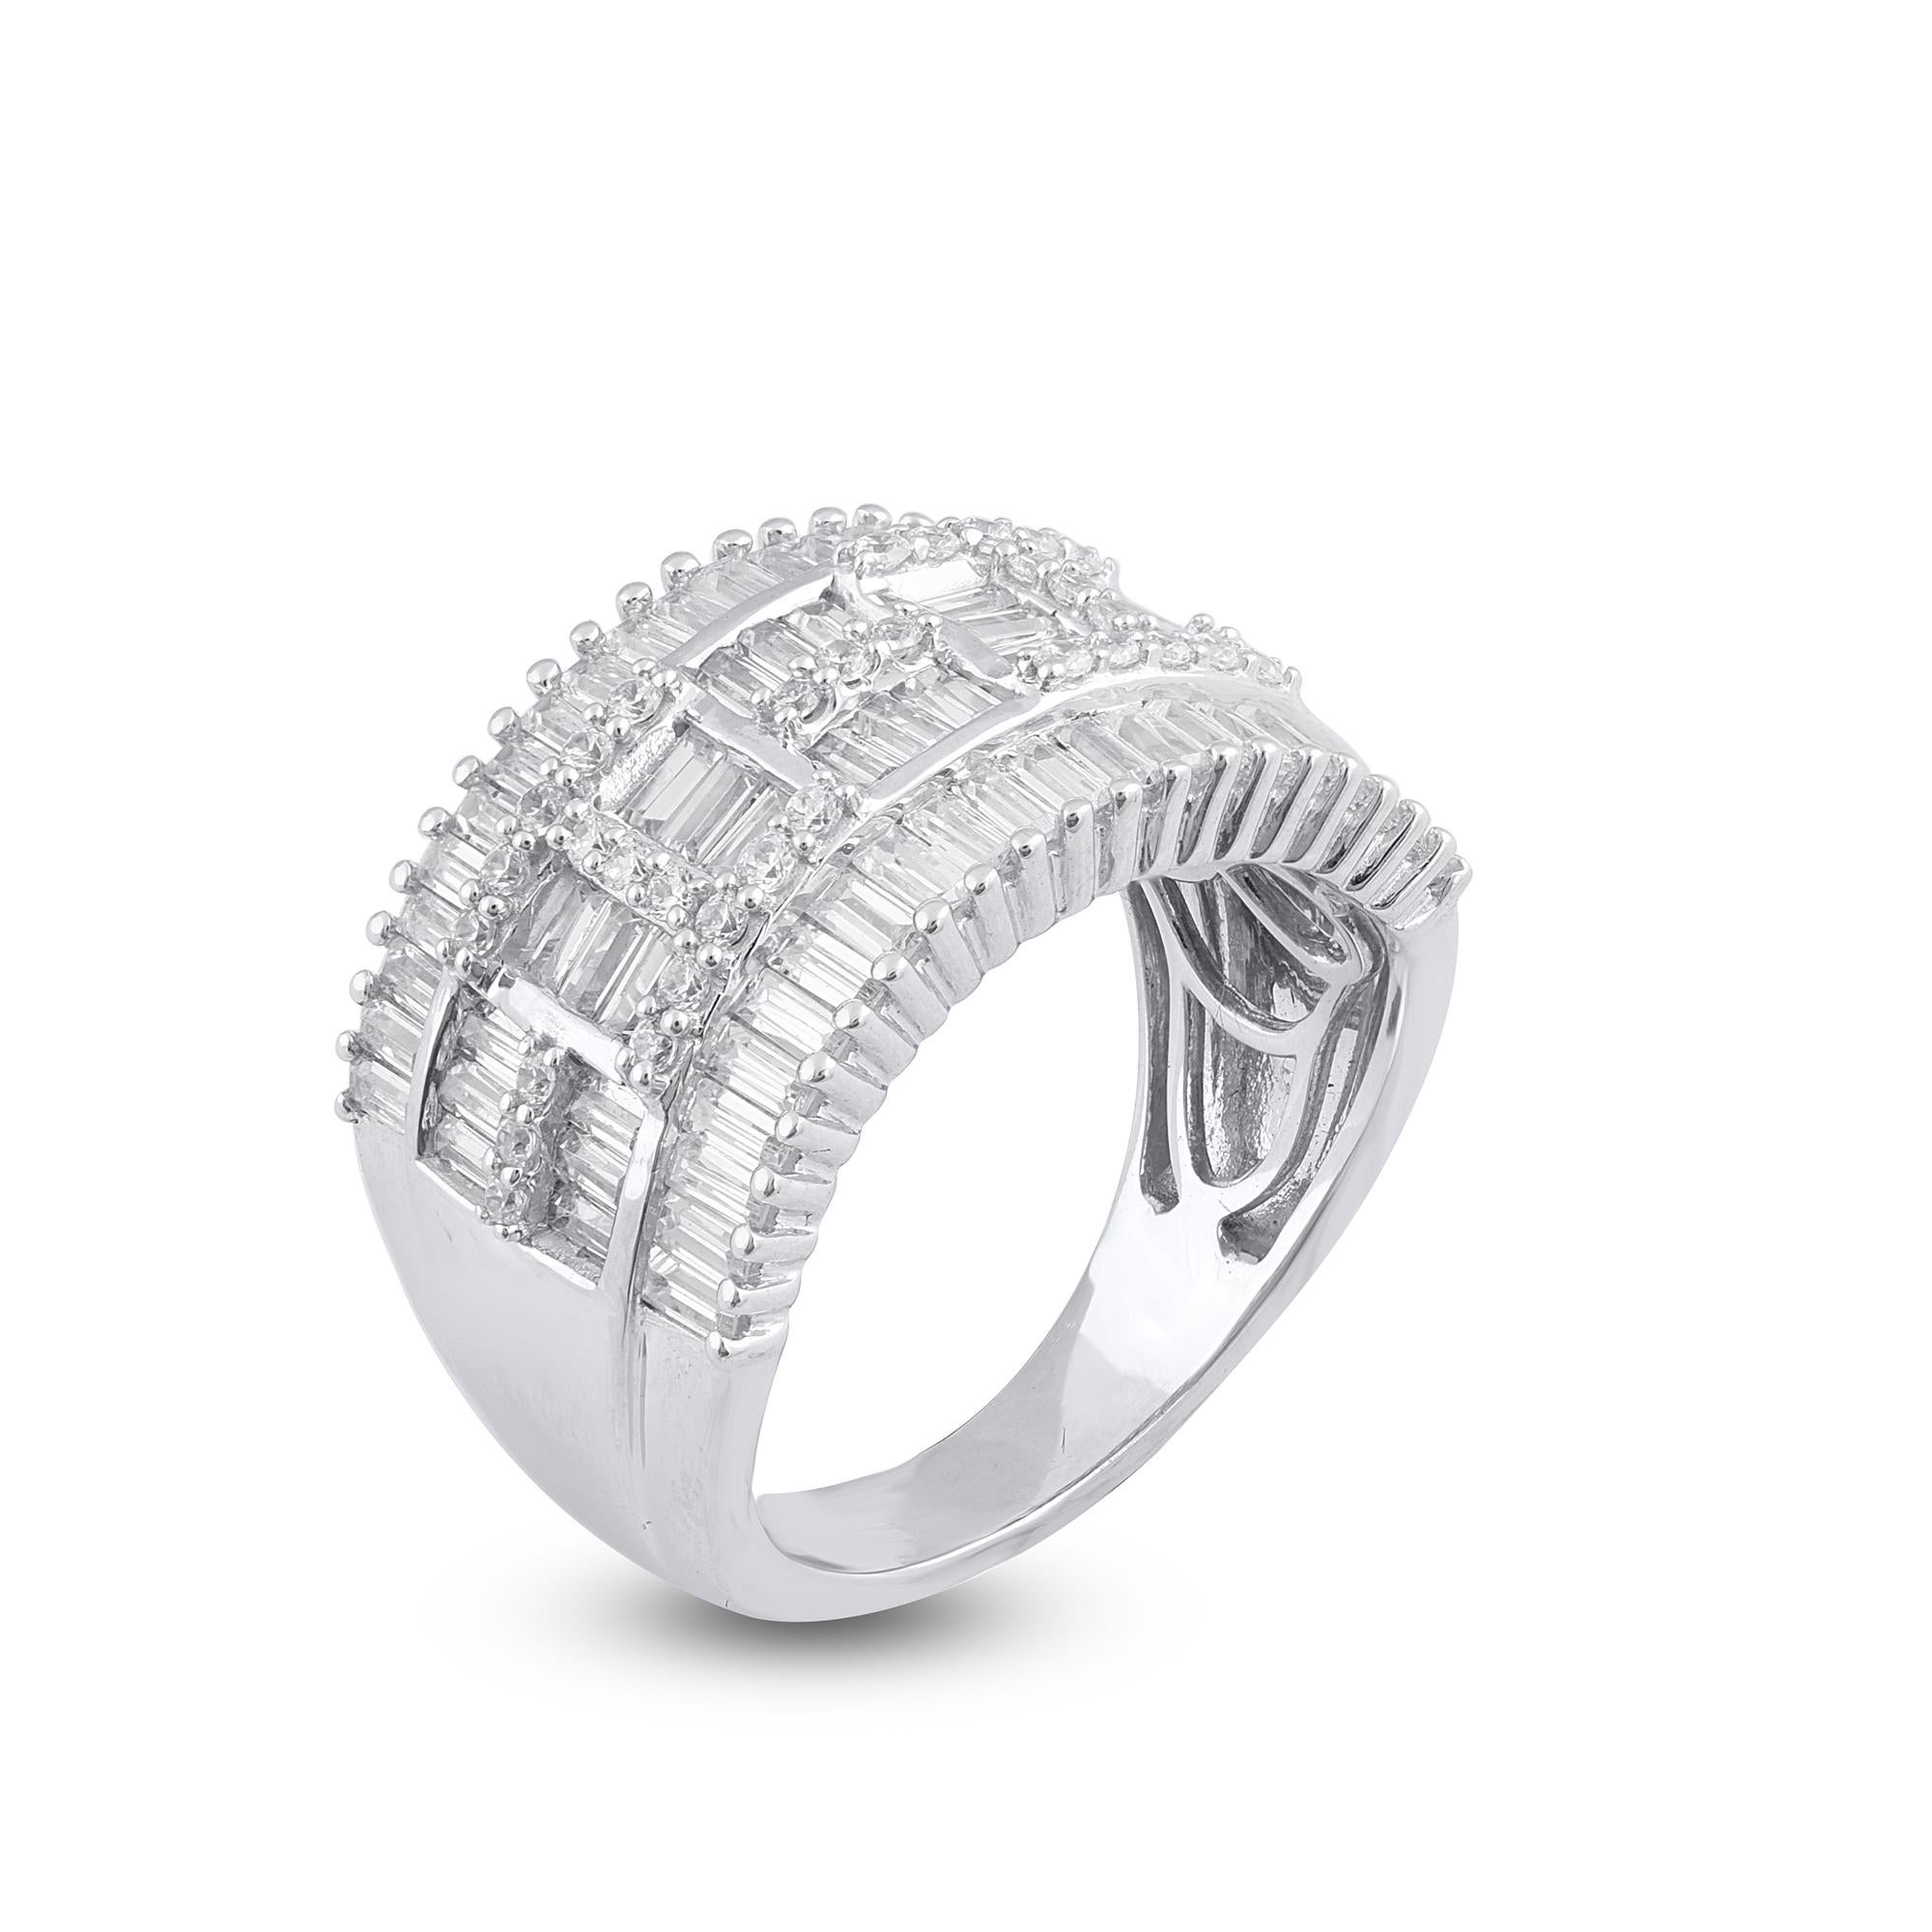 Don’t you want to take on the town with your sparkle? Make heads turn with this diamond studded wedding band. The ring is crafted from 14-karat gold in your choice of white, rose, or yellow, and features Round Brilliant 35 and Baguette - 72 white